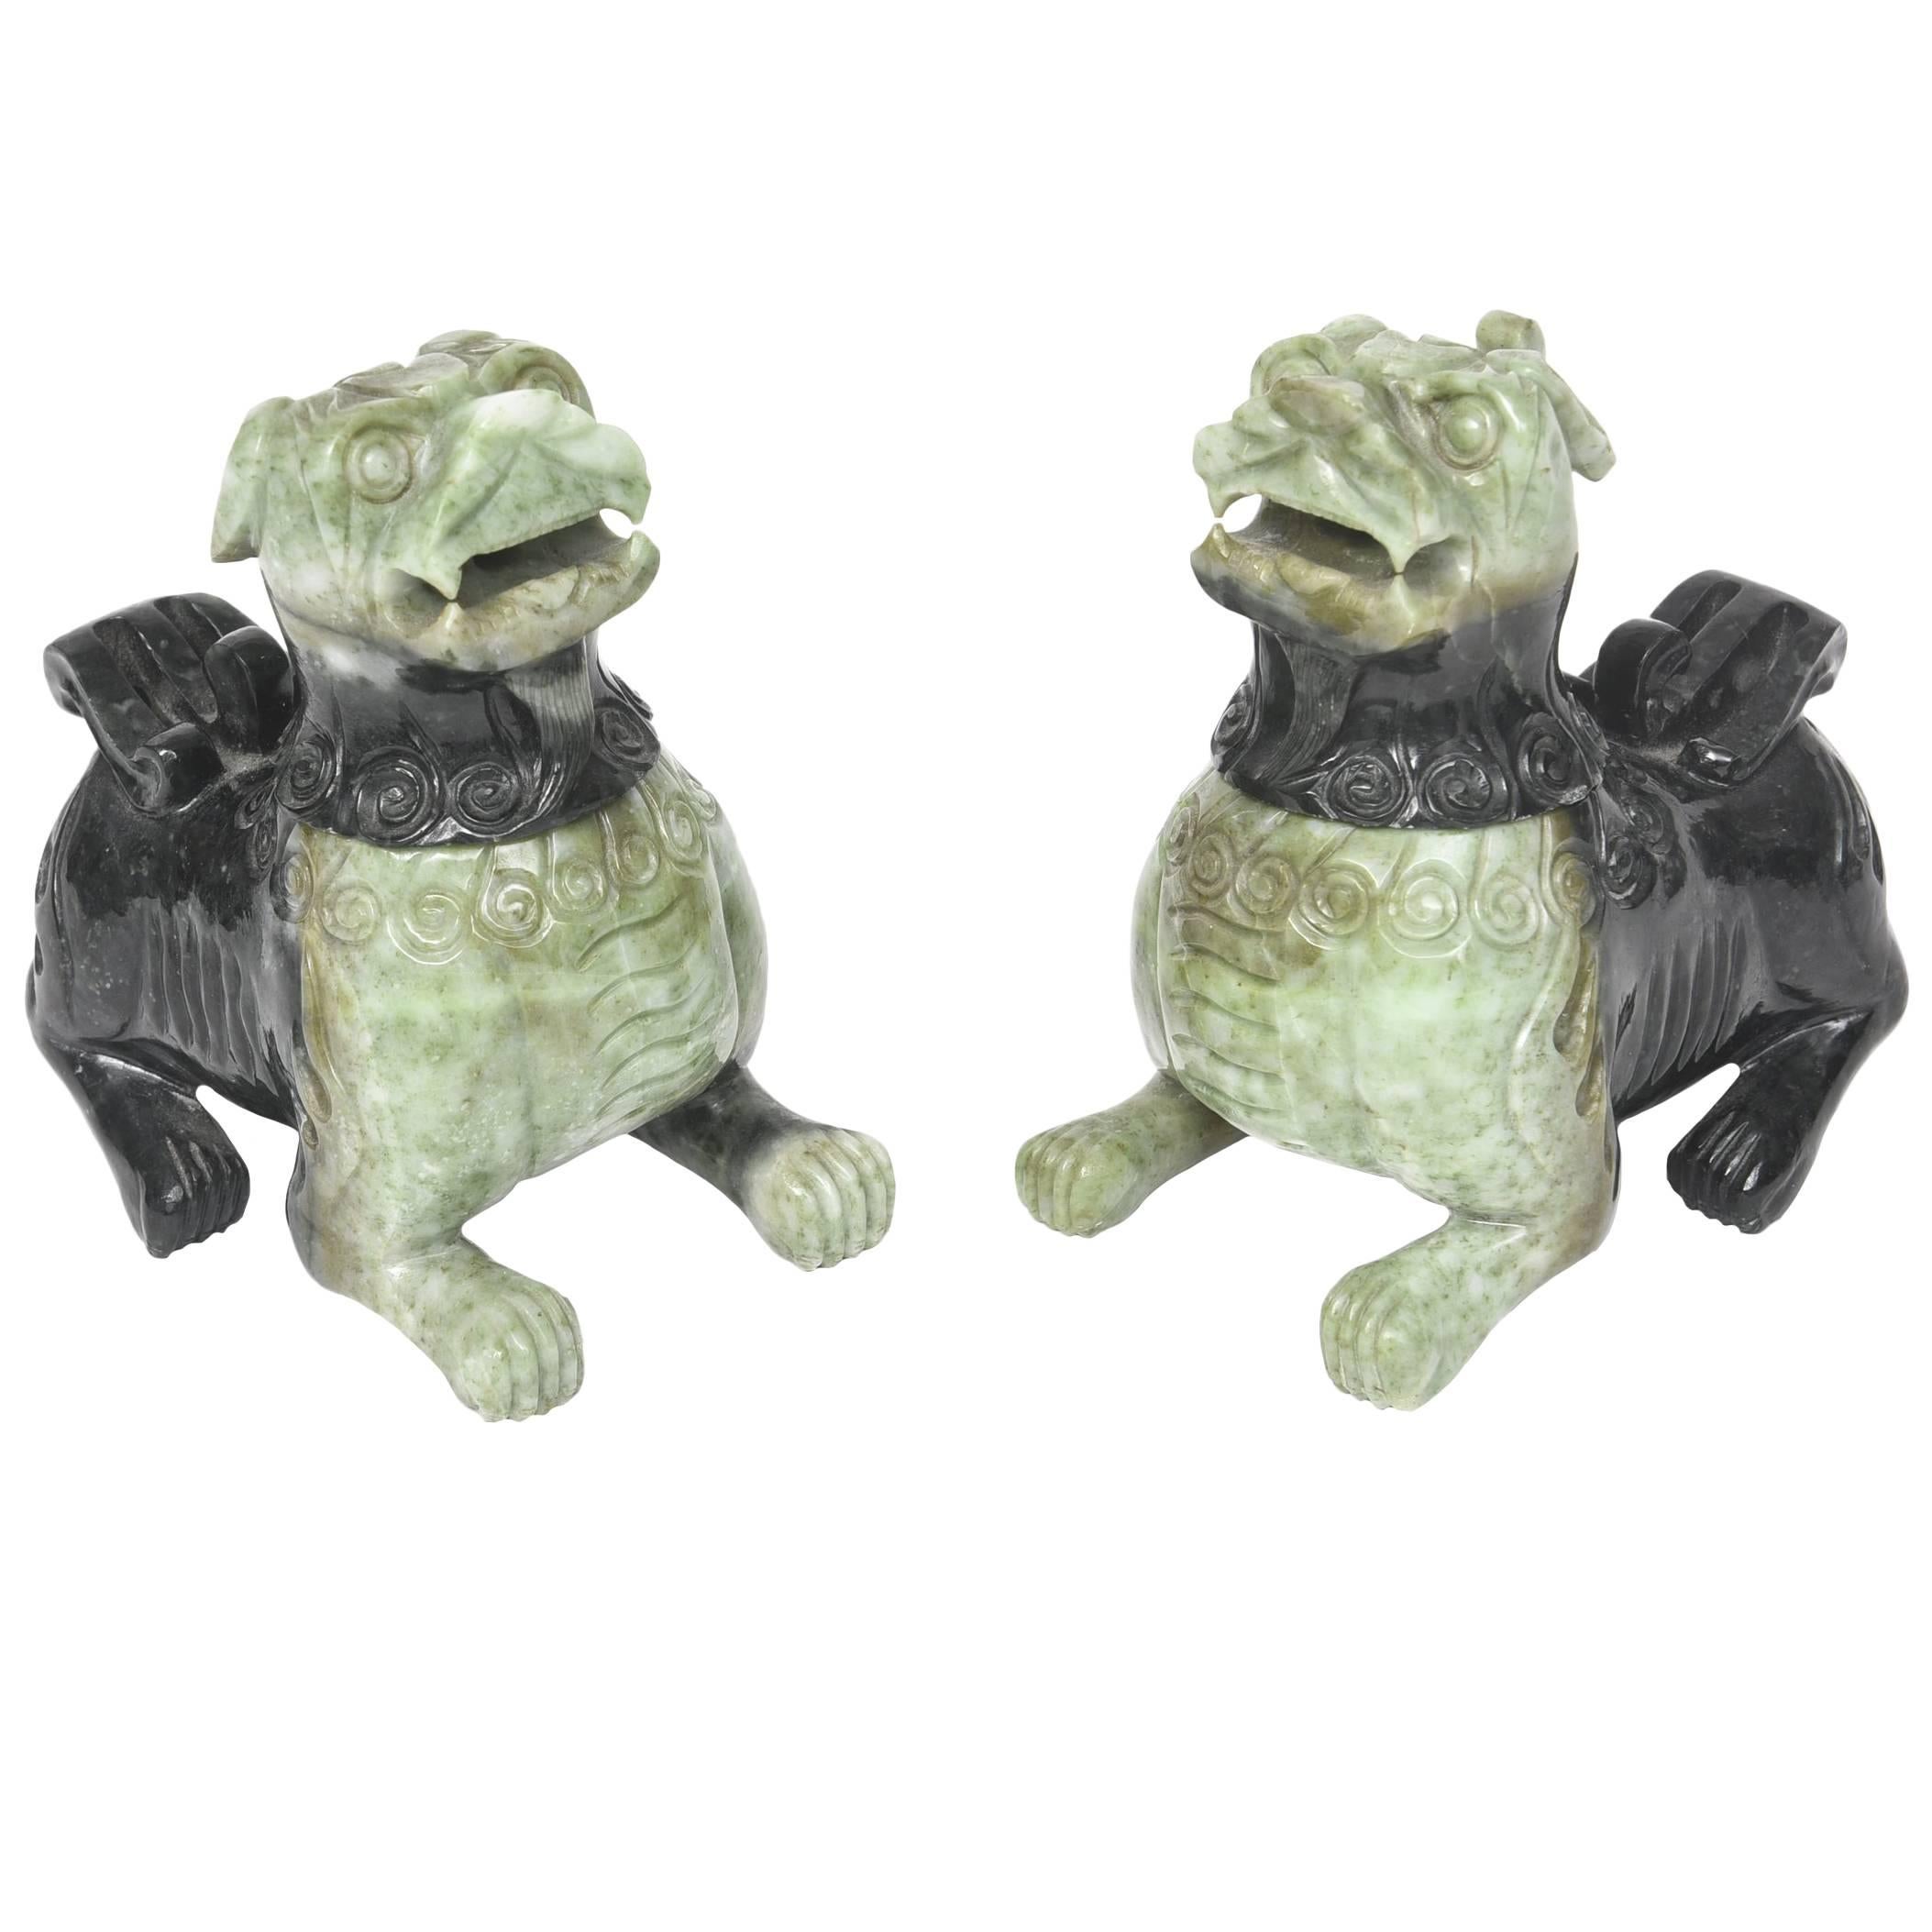 Mid-20th Century Pair of Chinese Carved Green Hardstone Foo Dogs / Lions For Sale